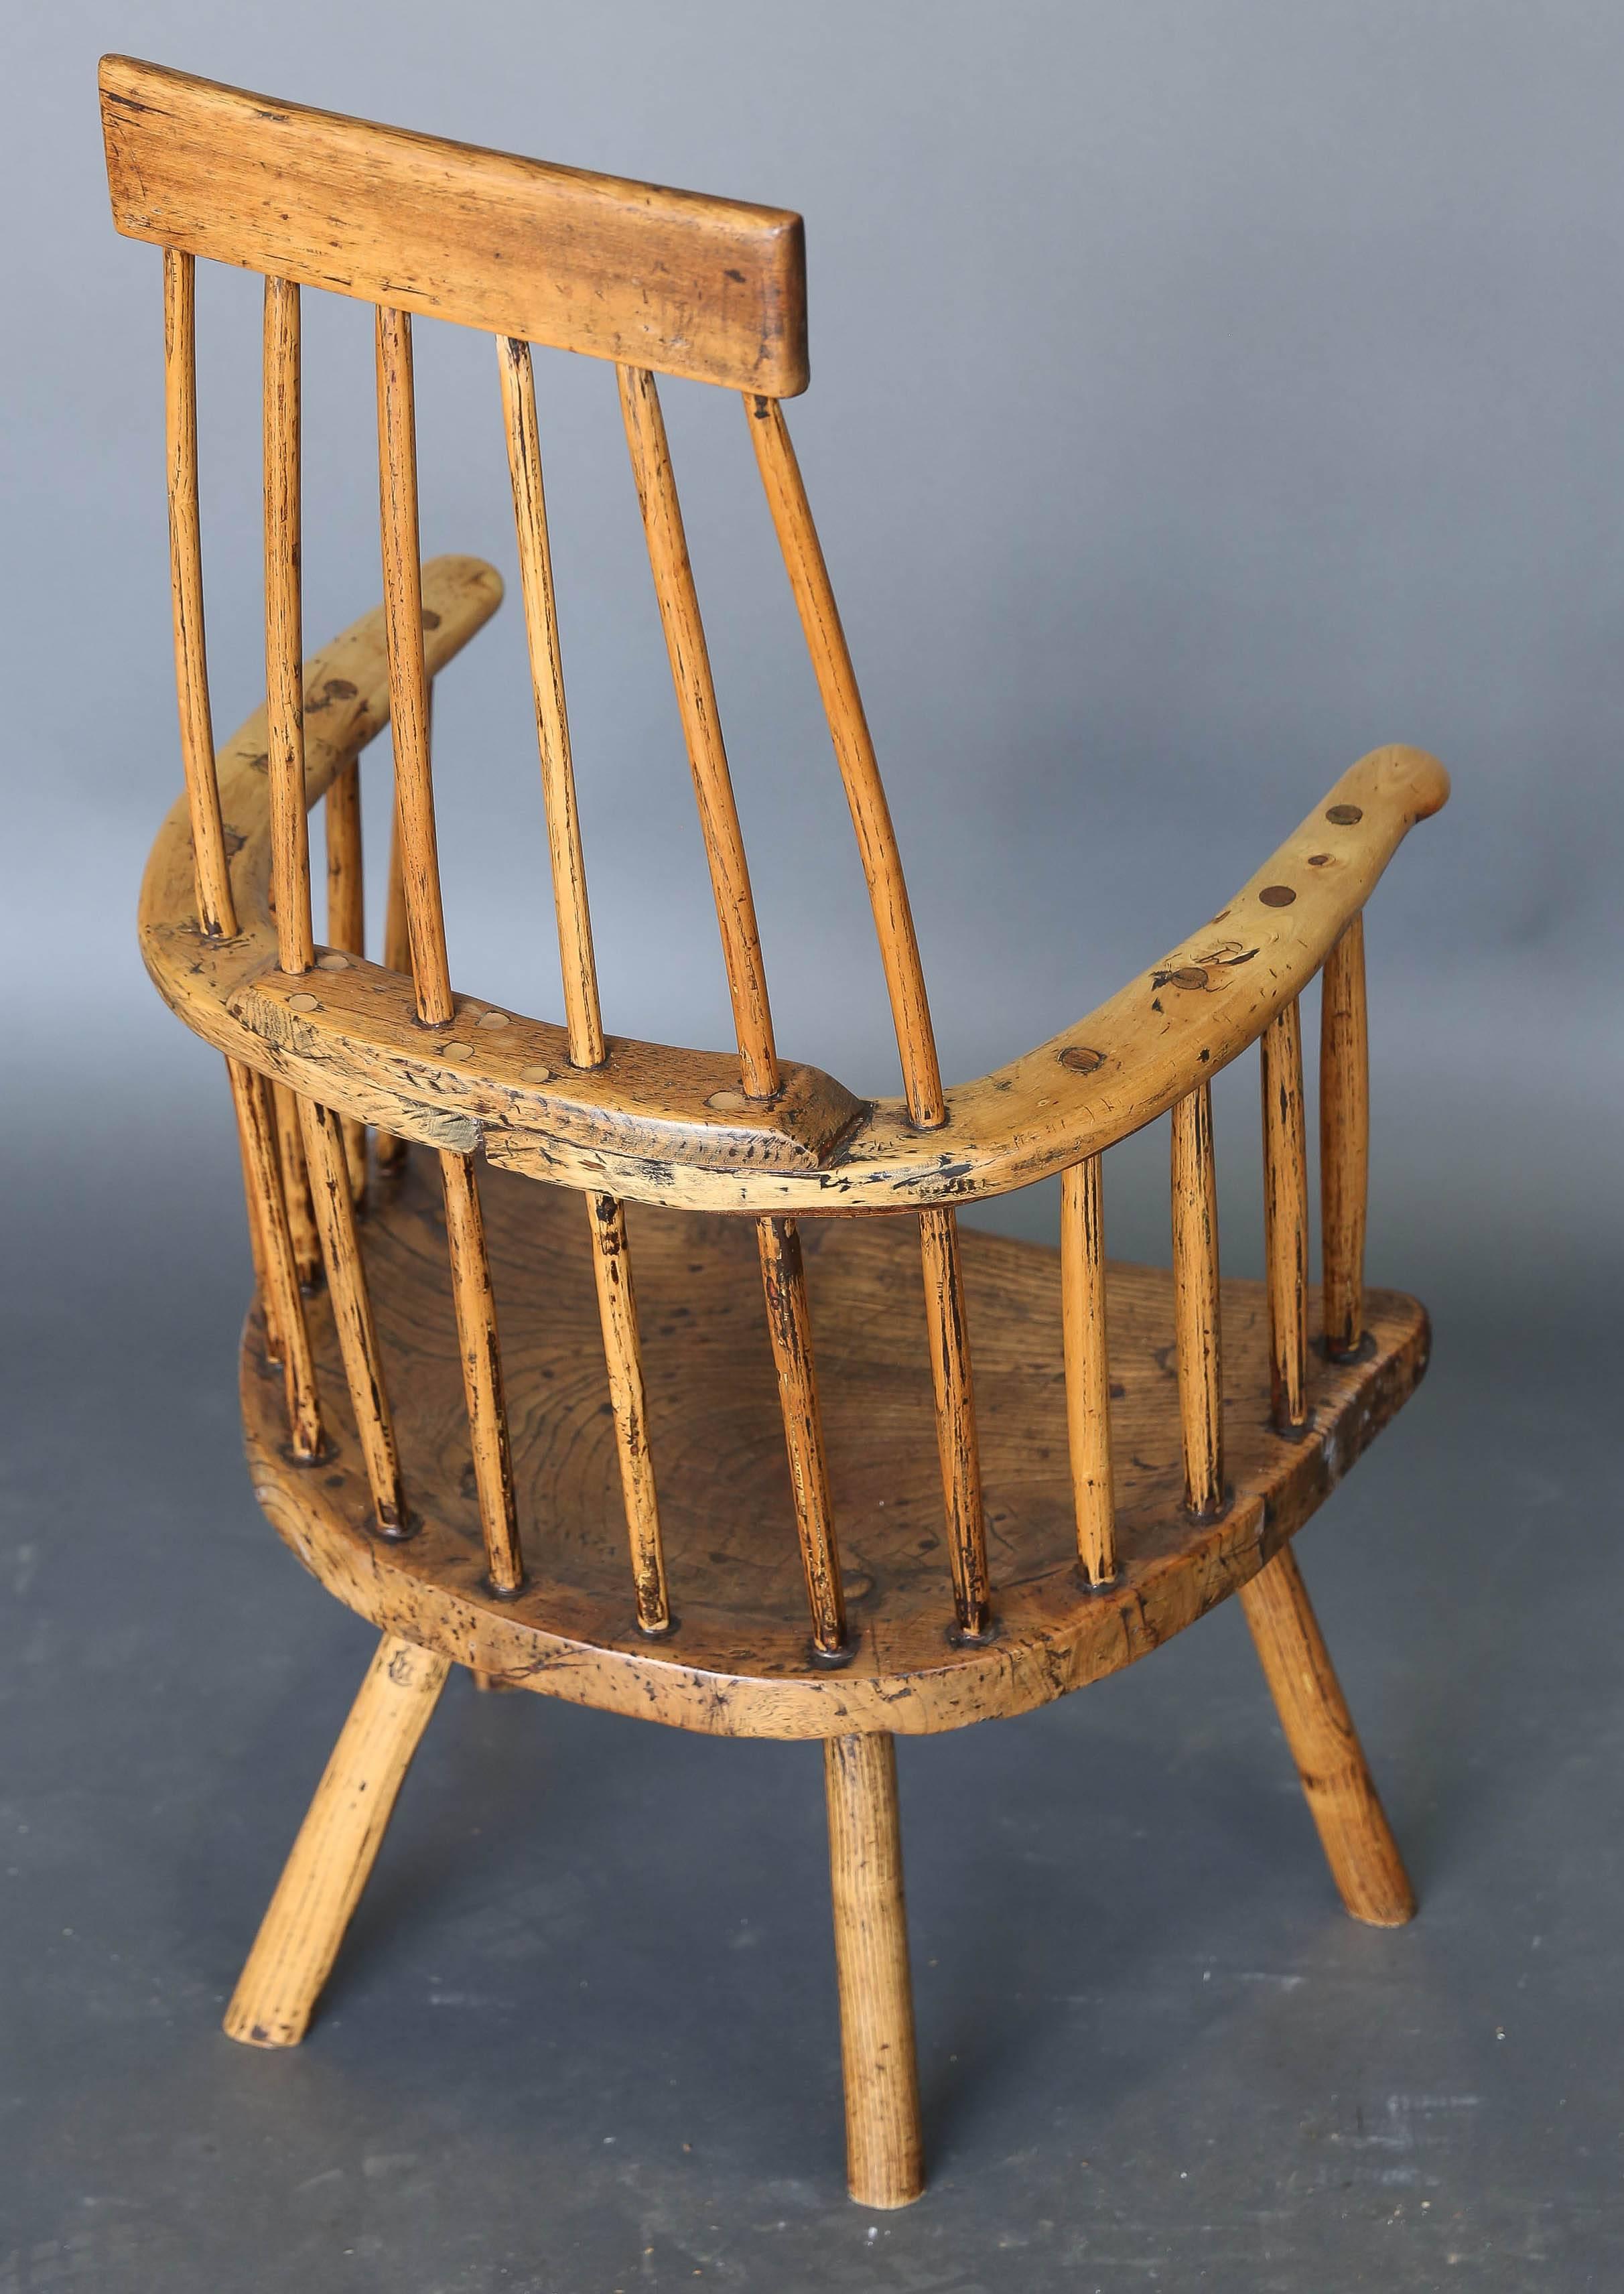 English Antique Primitive 18th Century Folk Art Stick Chair from Wales